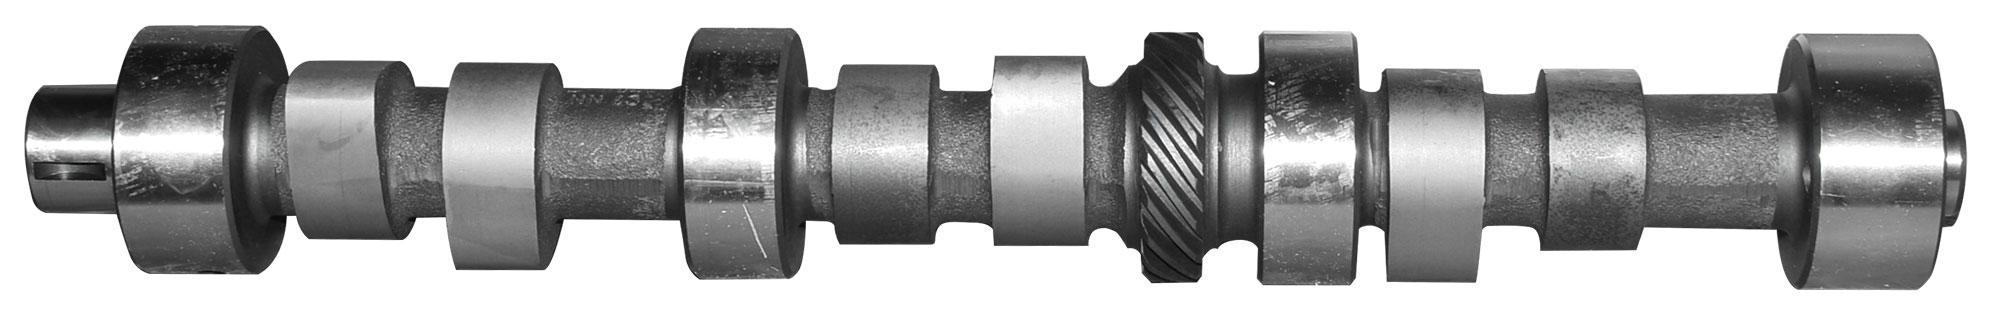 thumbnail of Camshaft Ford 00 10 30 Series